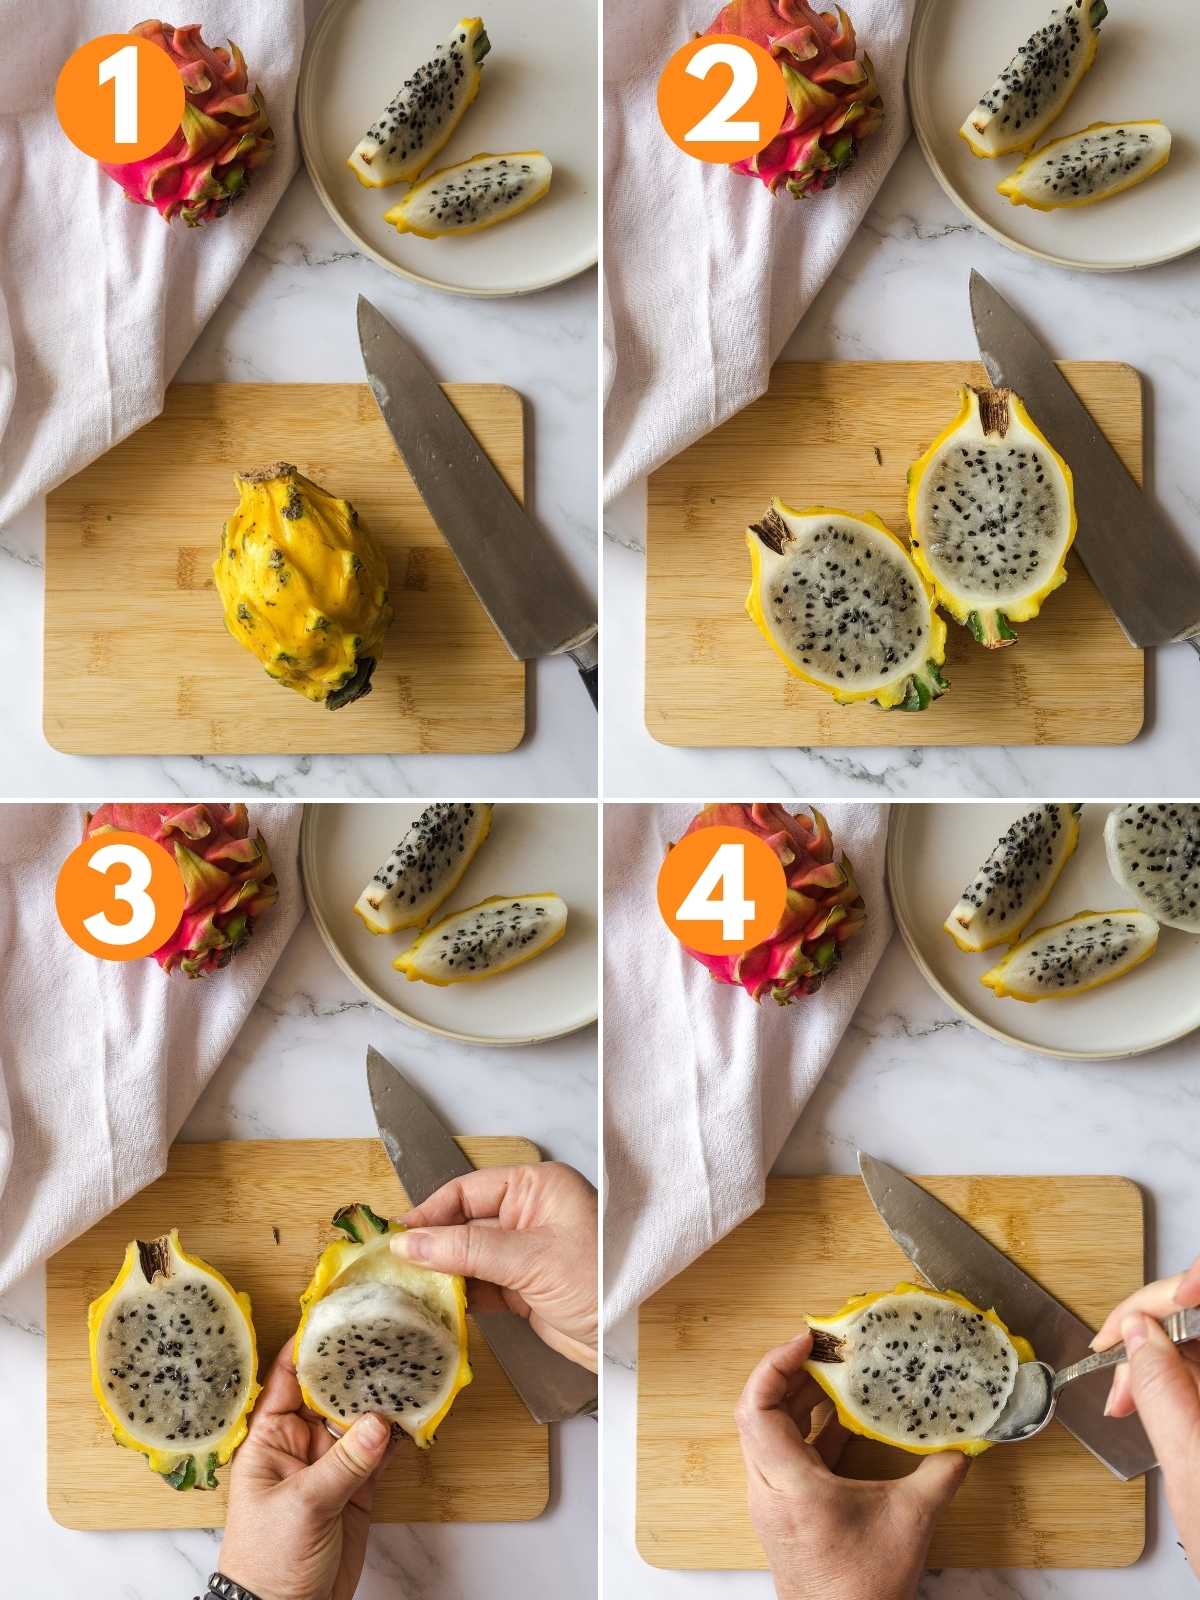 Collage of cutting the dragon fruit in half and removing the peel.